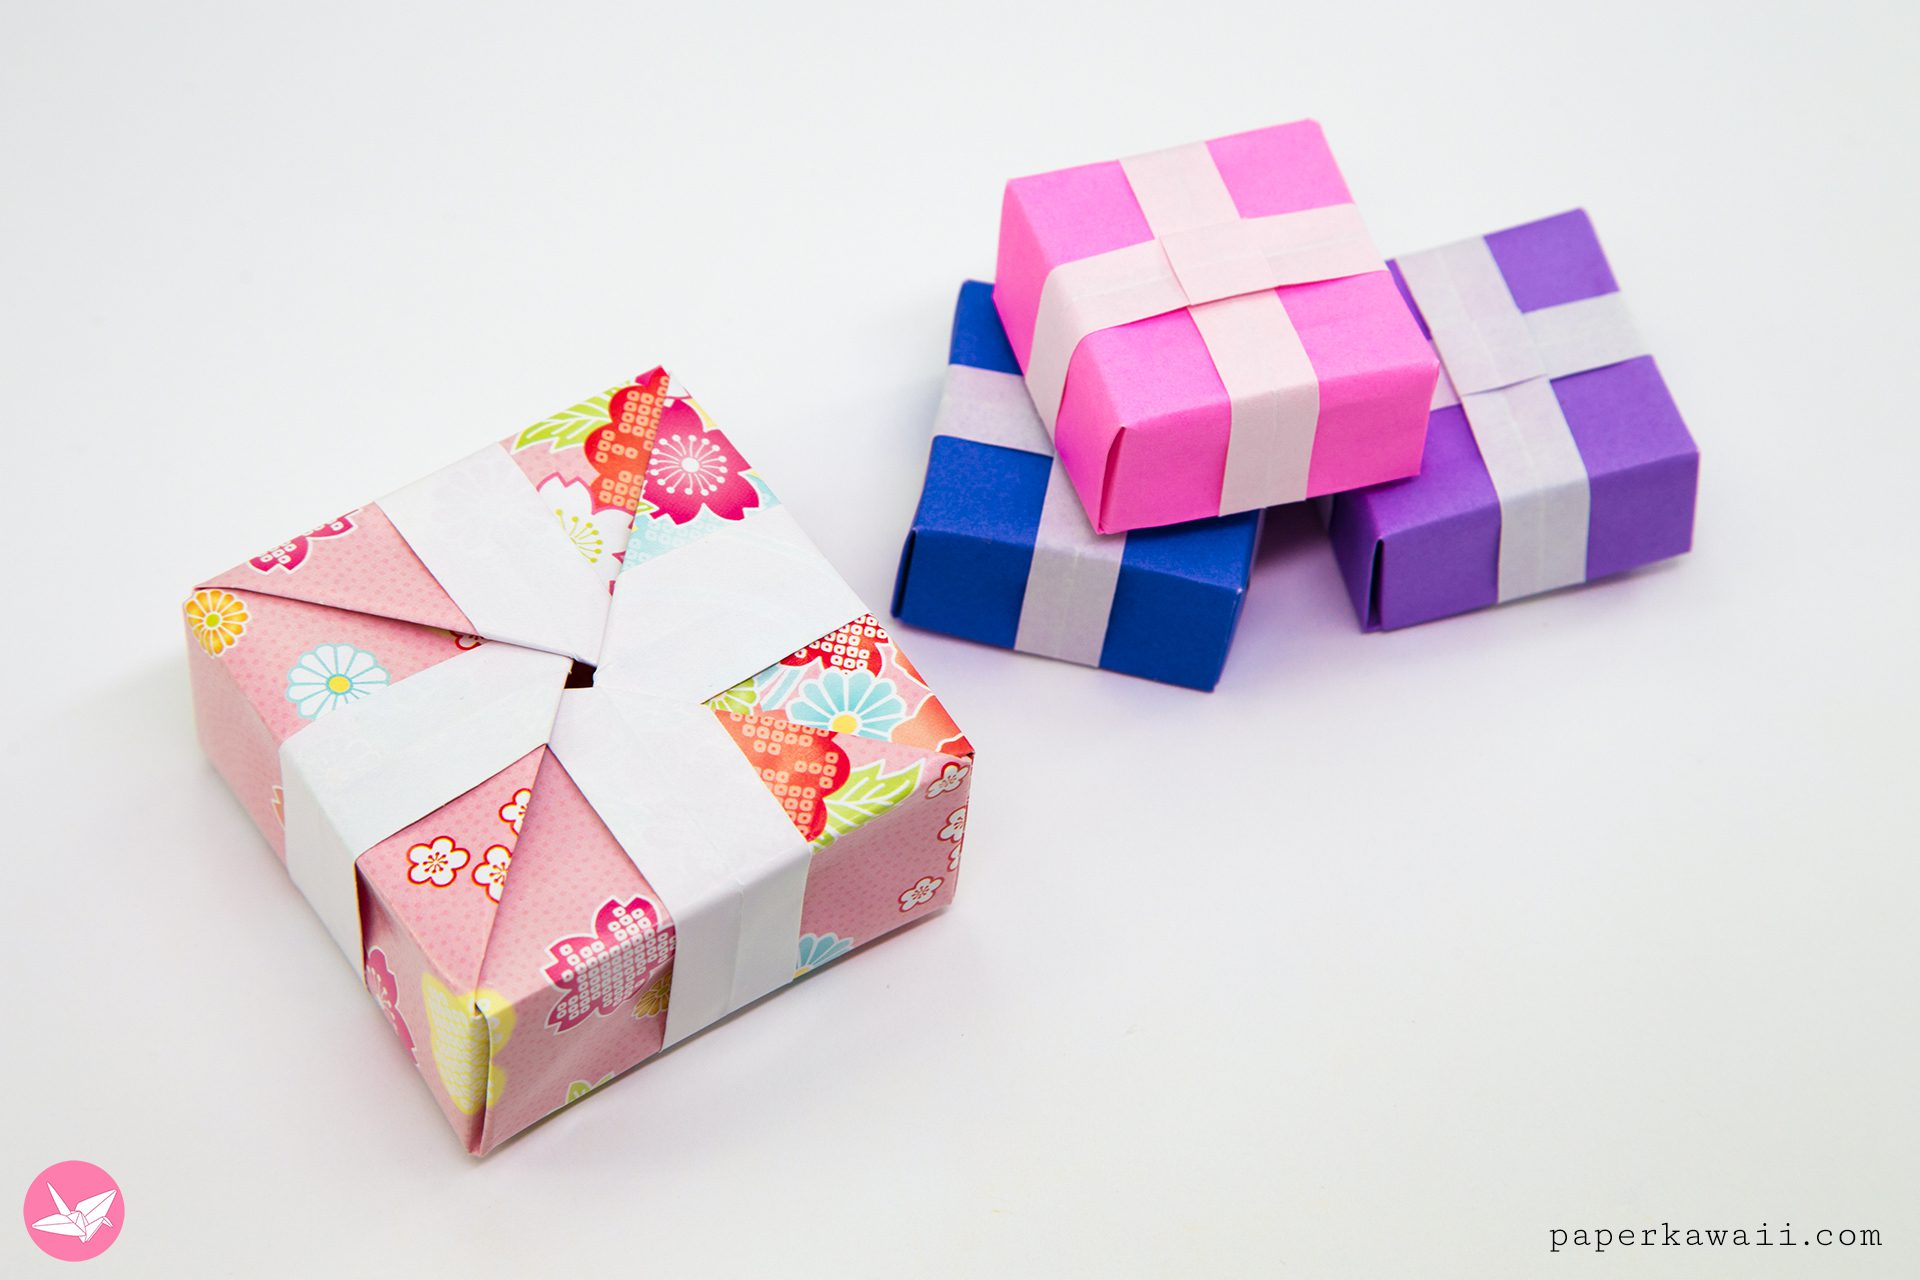 How to Make Gift Boxes for Treats, Tumblers, and Trinkets! - Jennifer Maker